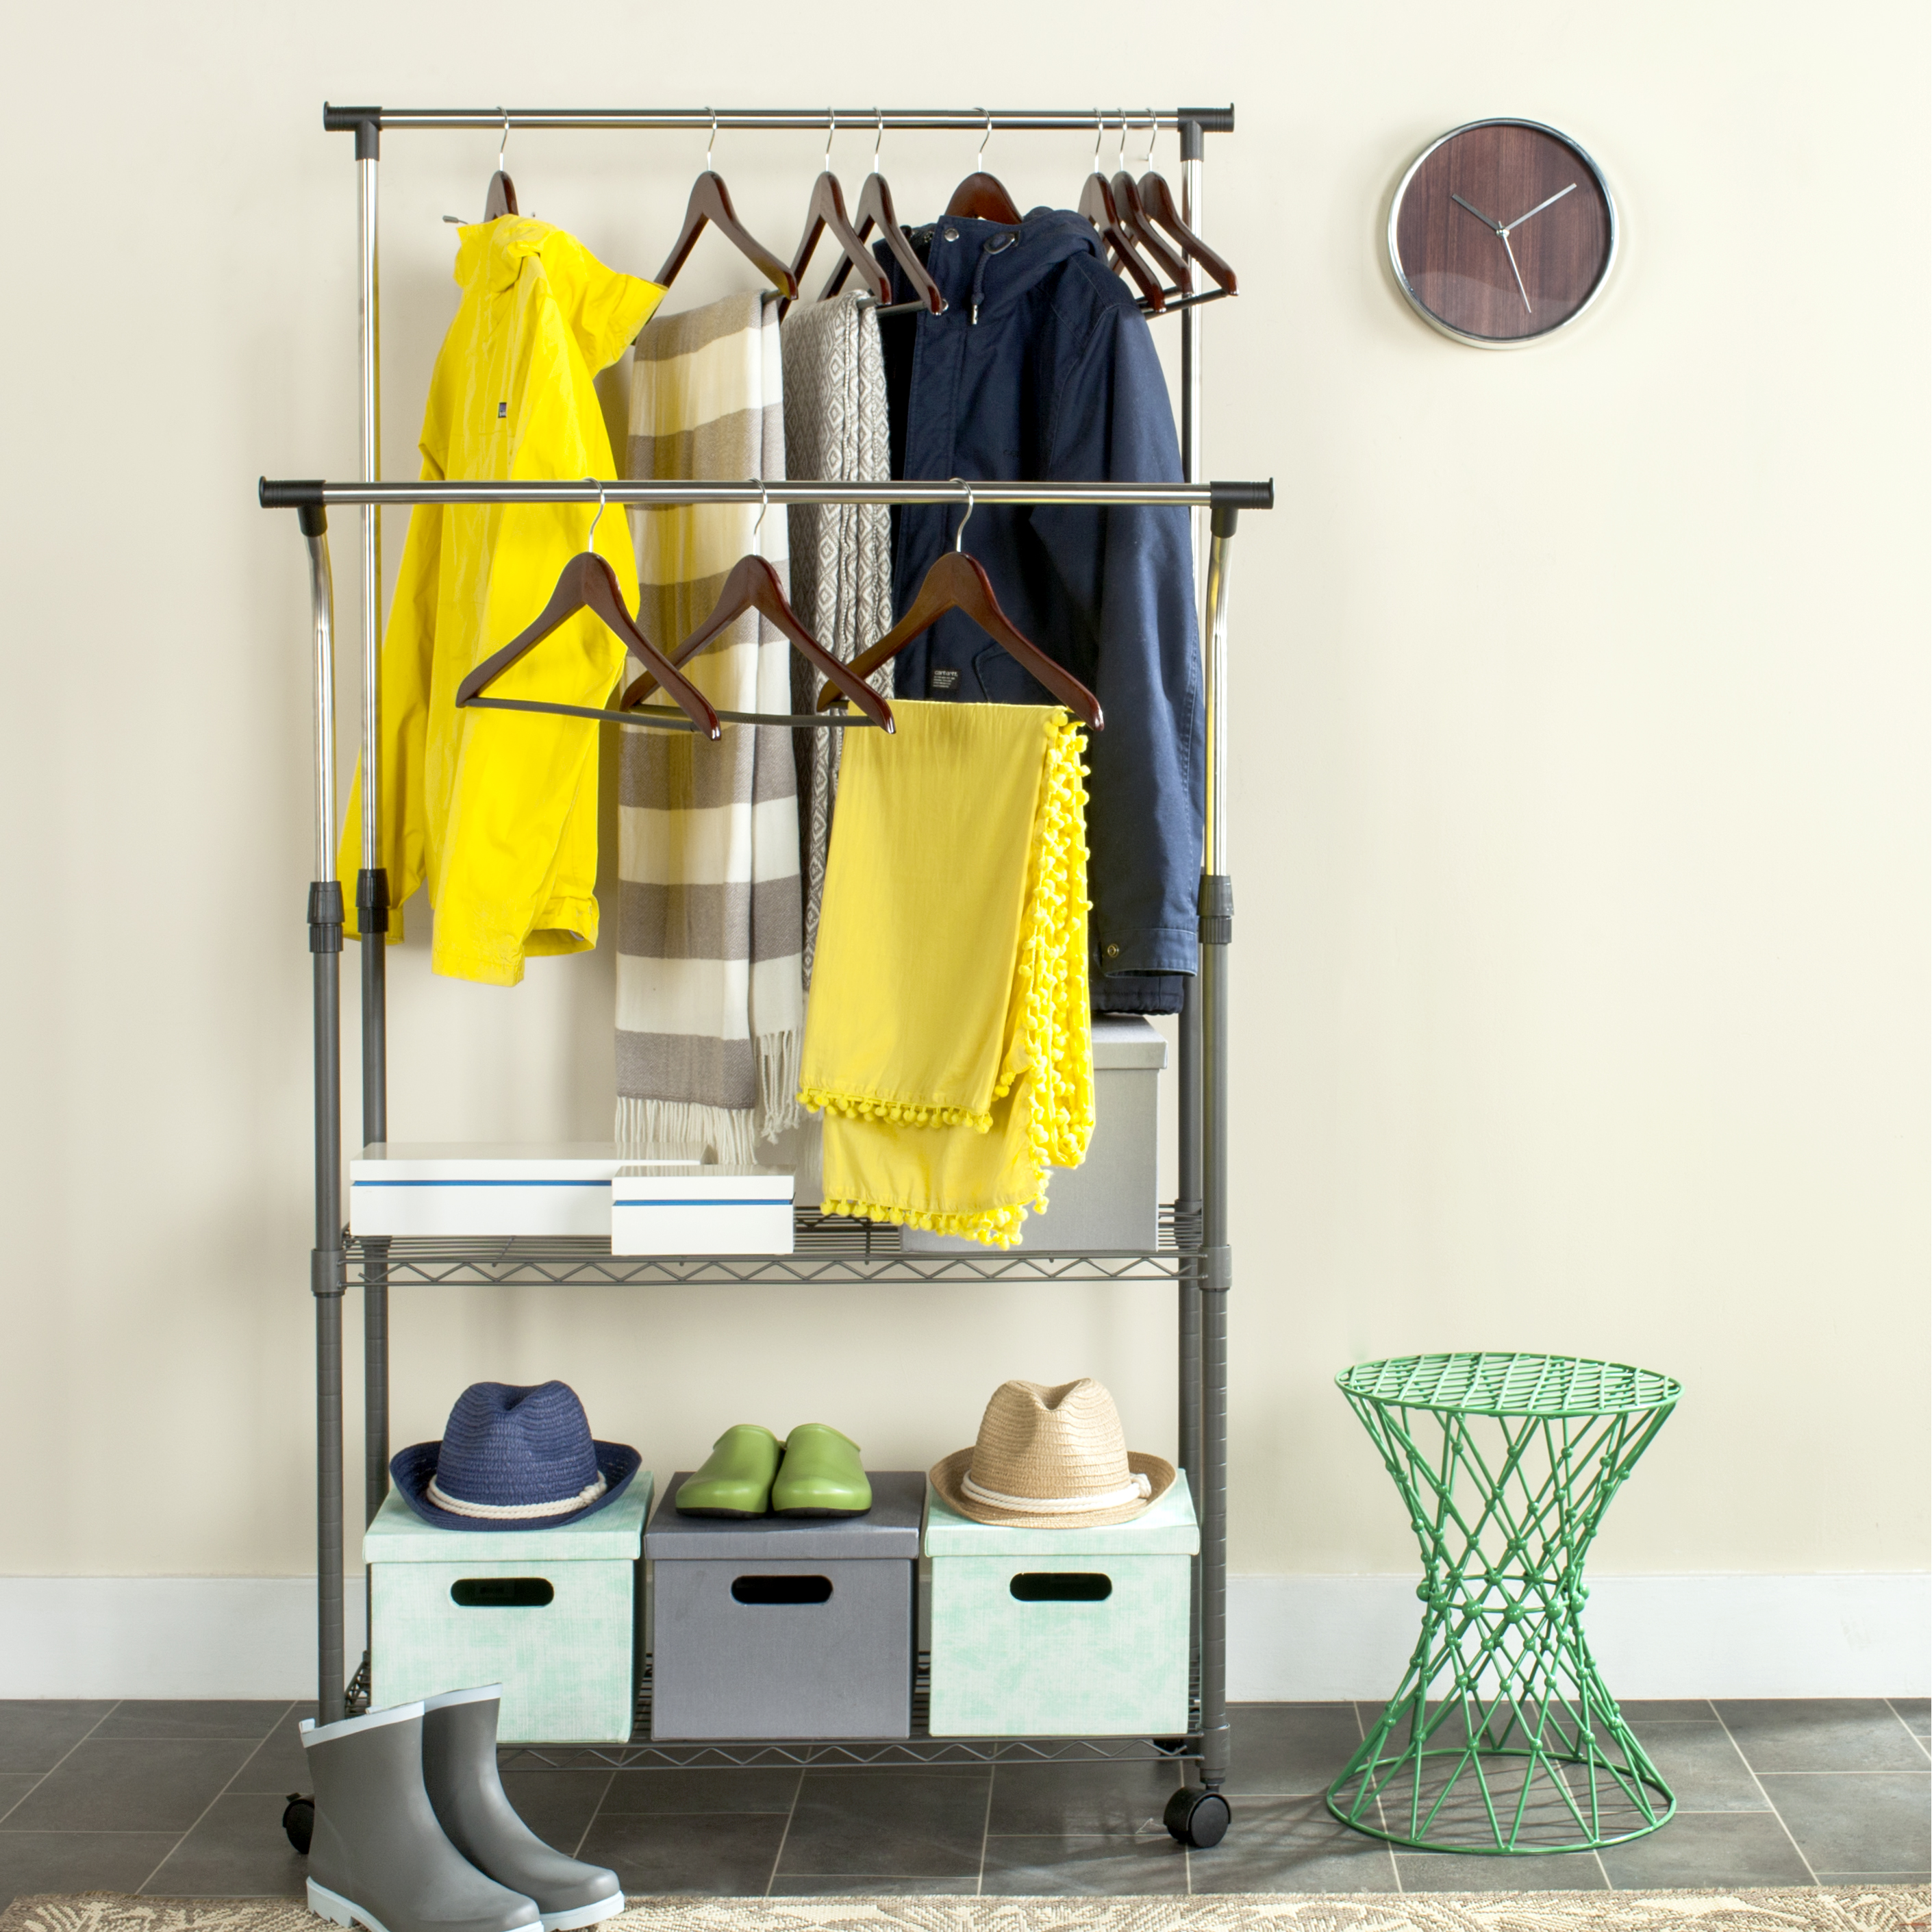 Safavieh Giorgio Chrome Wire Double Rod Clothes Rack with Casters - image 1 of 6